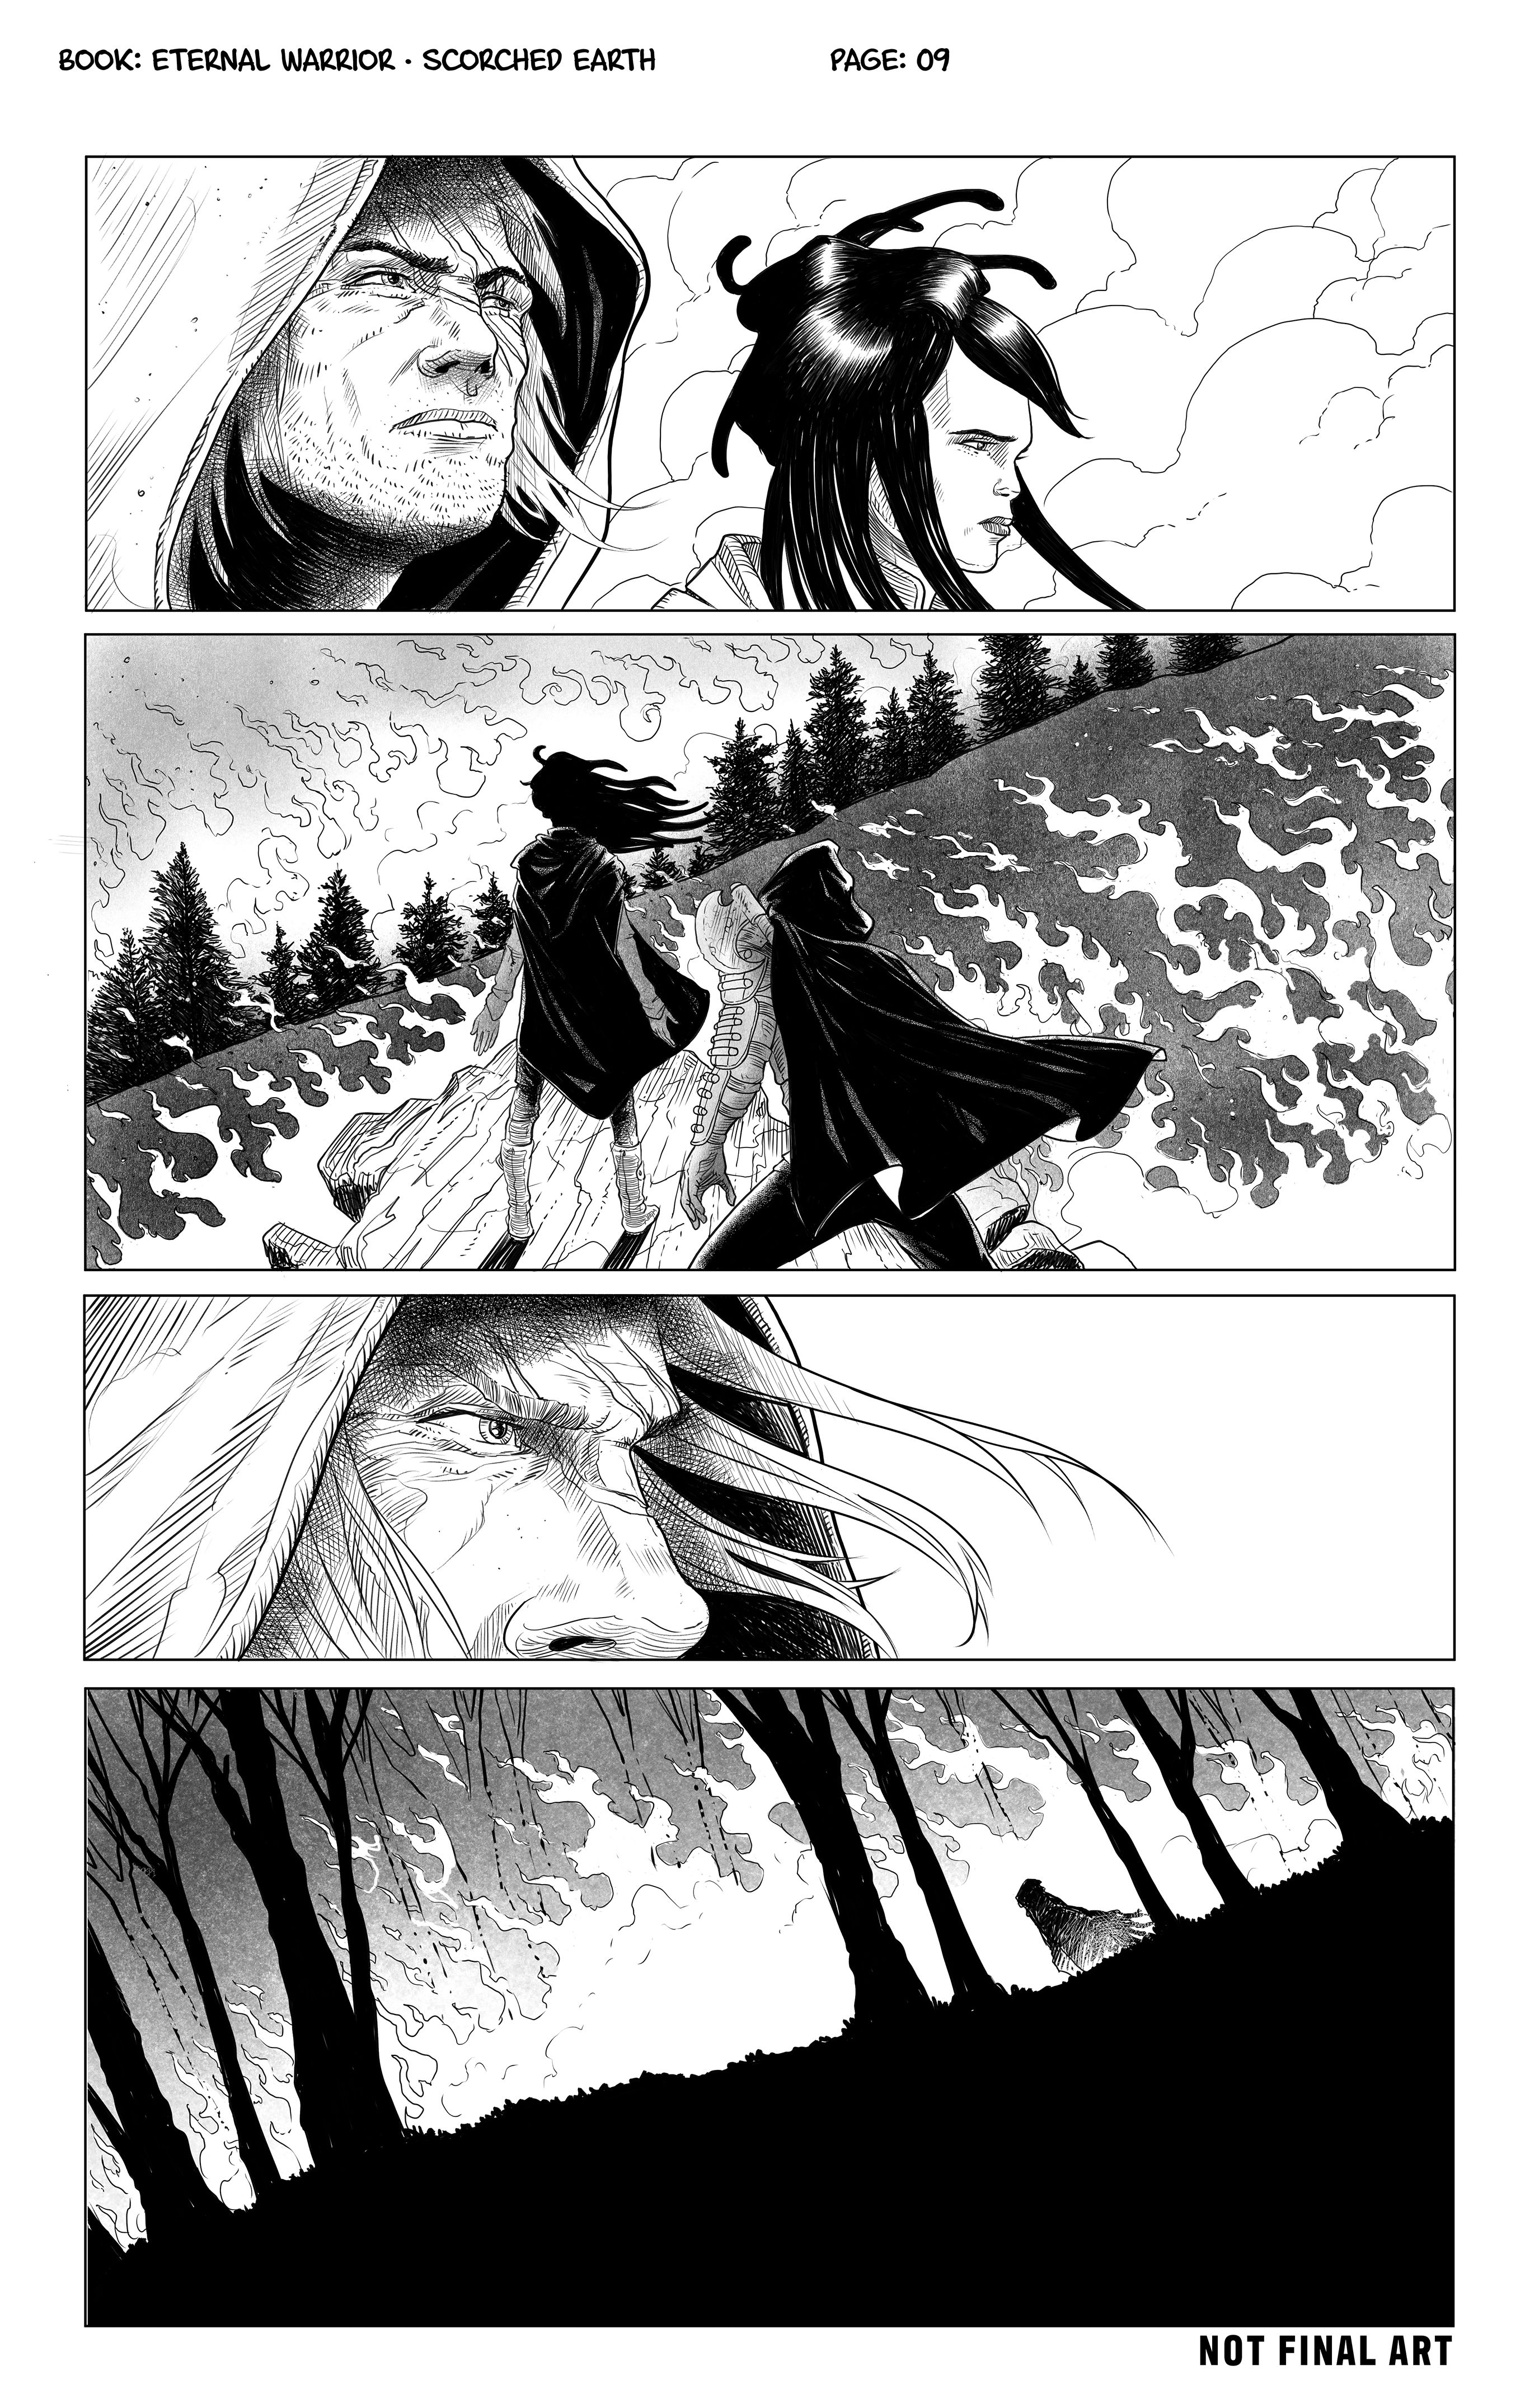 Eternal Warrior: Scorched Earth preview pages for Valiant Kickstarter graphic novel